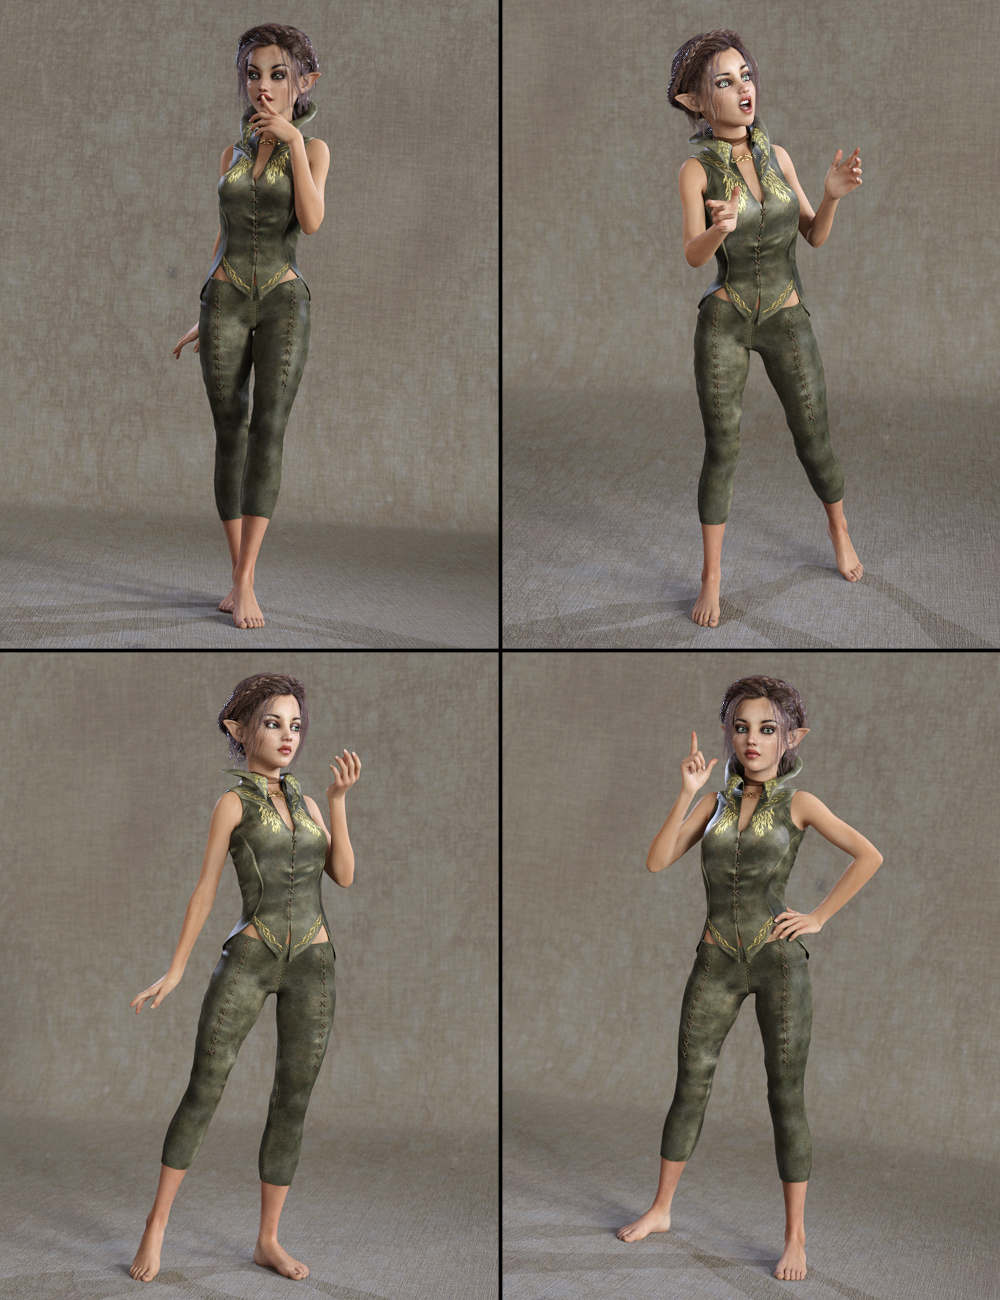 Pixie Perfect Poses for Izabella 7 by: lunchlady, 3D Models by Daz 3D